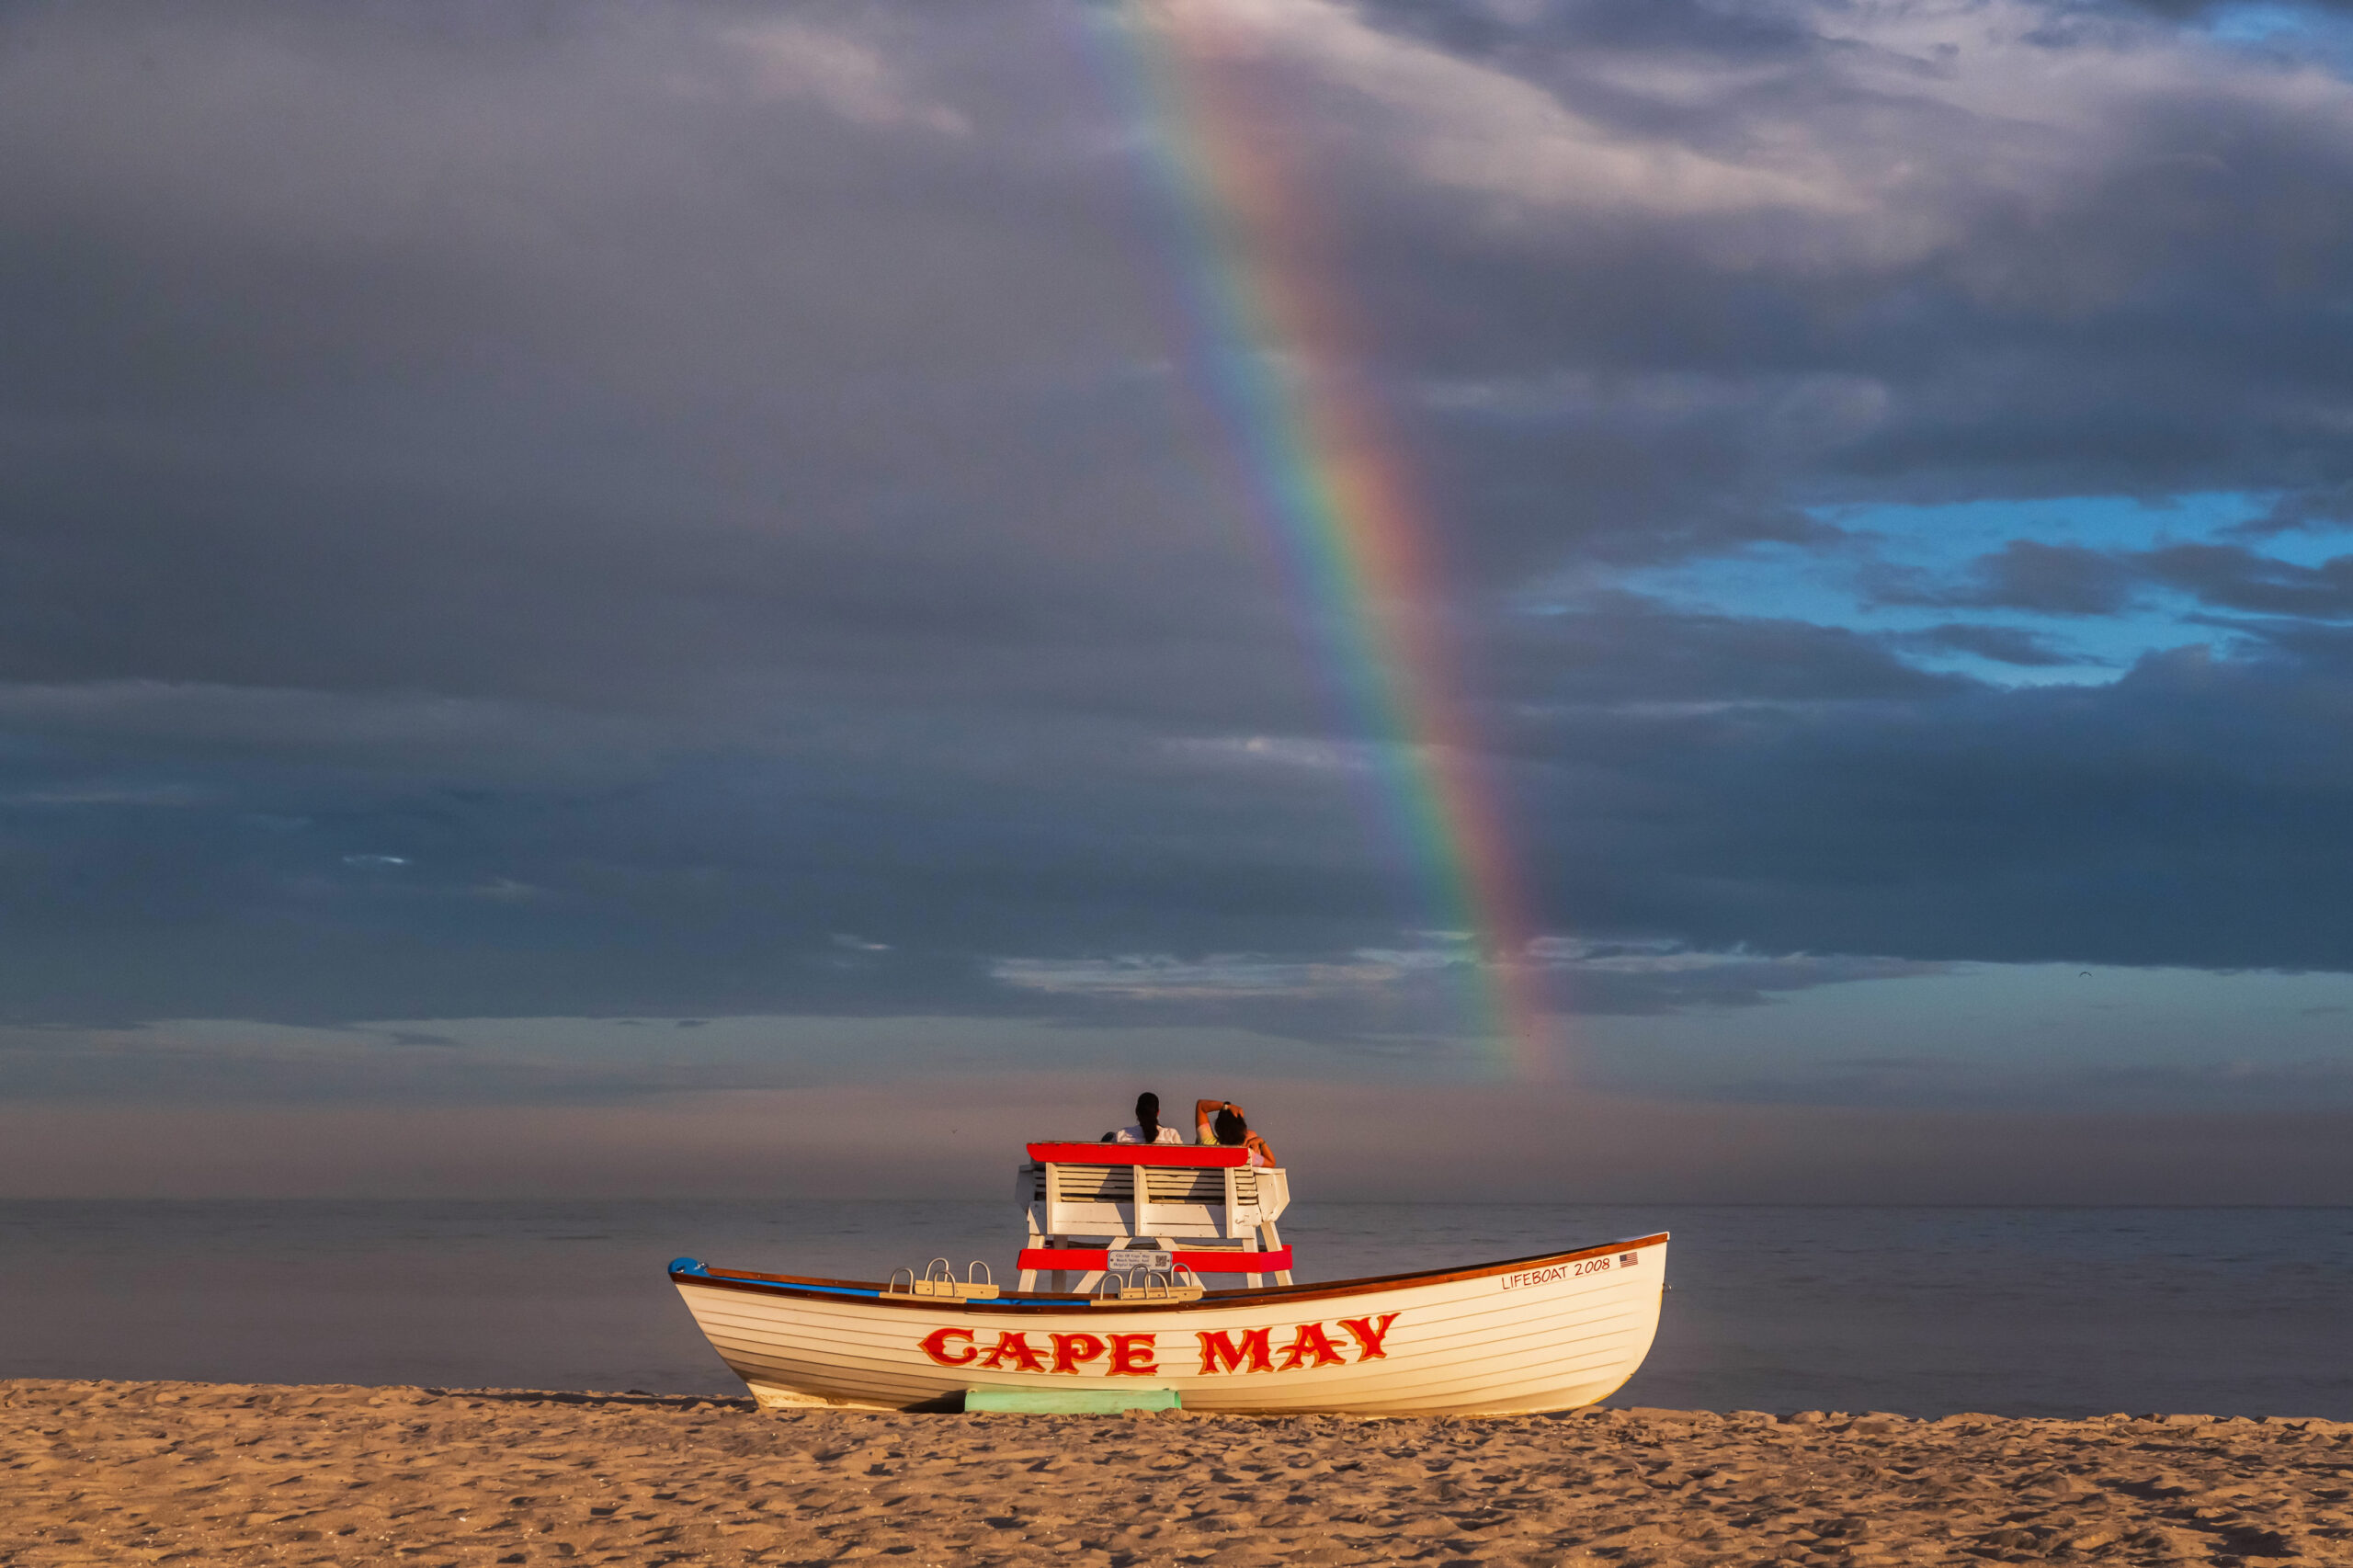 A rainbow is in a cloudy sky. There are two people sitting in a lifeguard stand and there is a "Cape May" lifeguard boat on the beach.